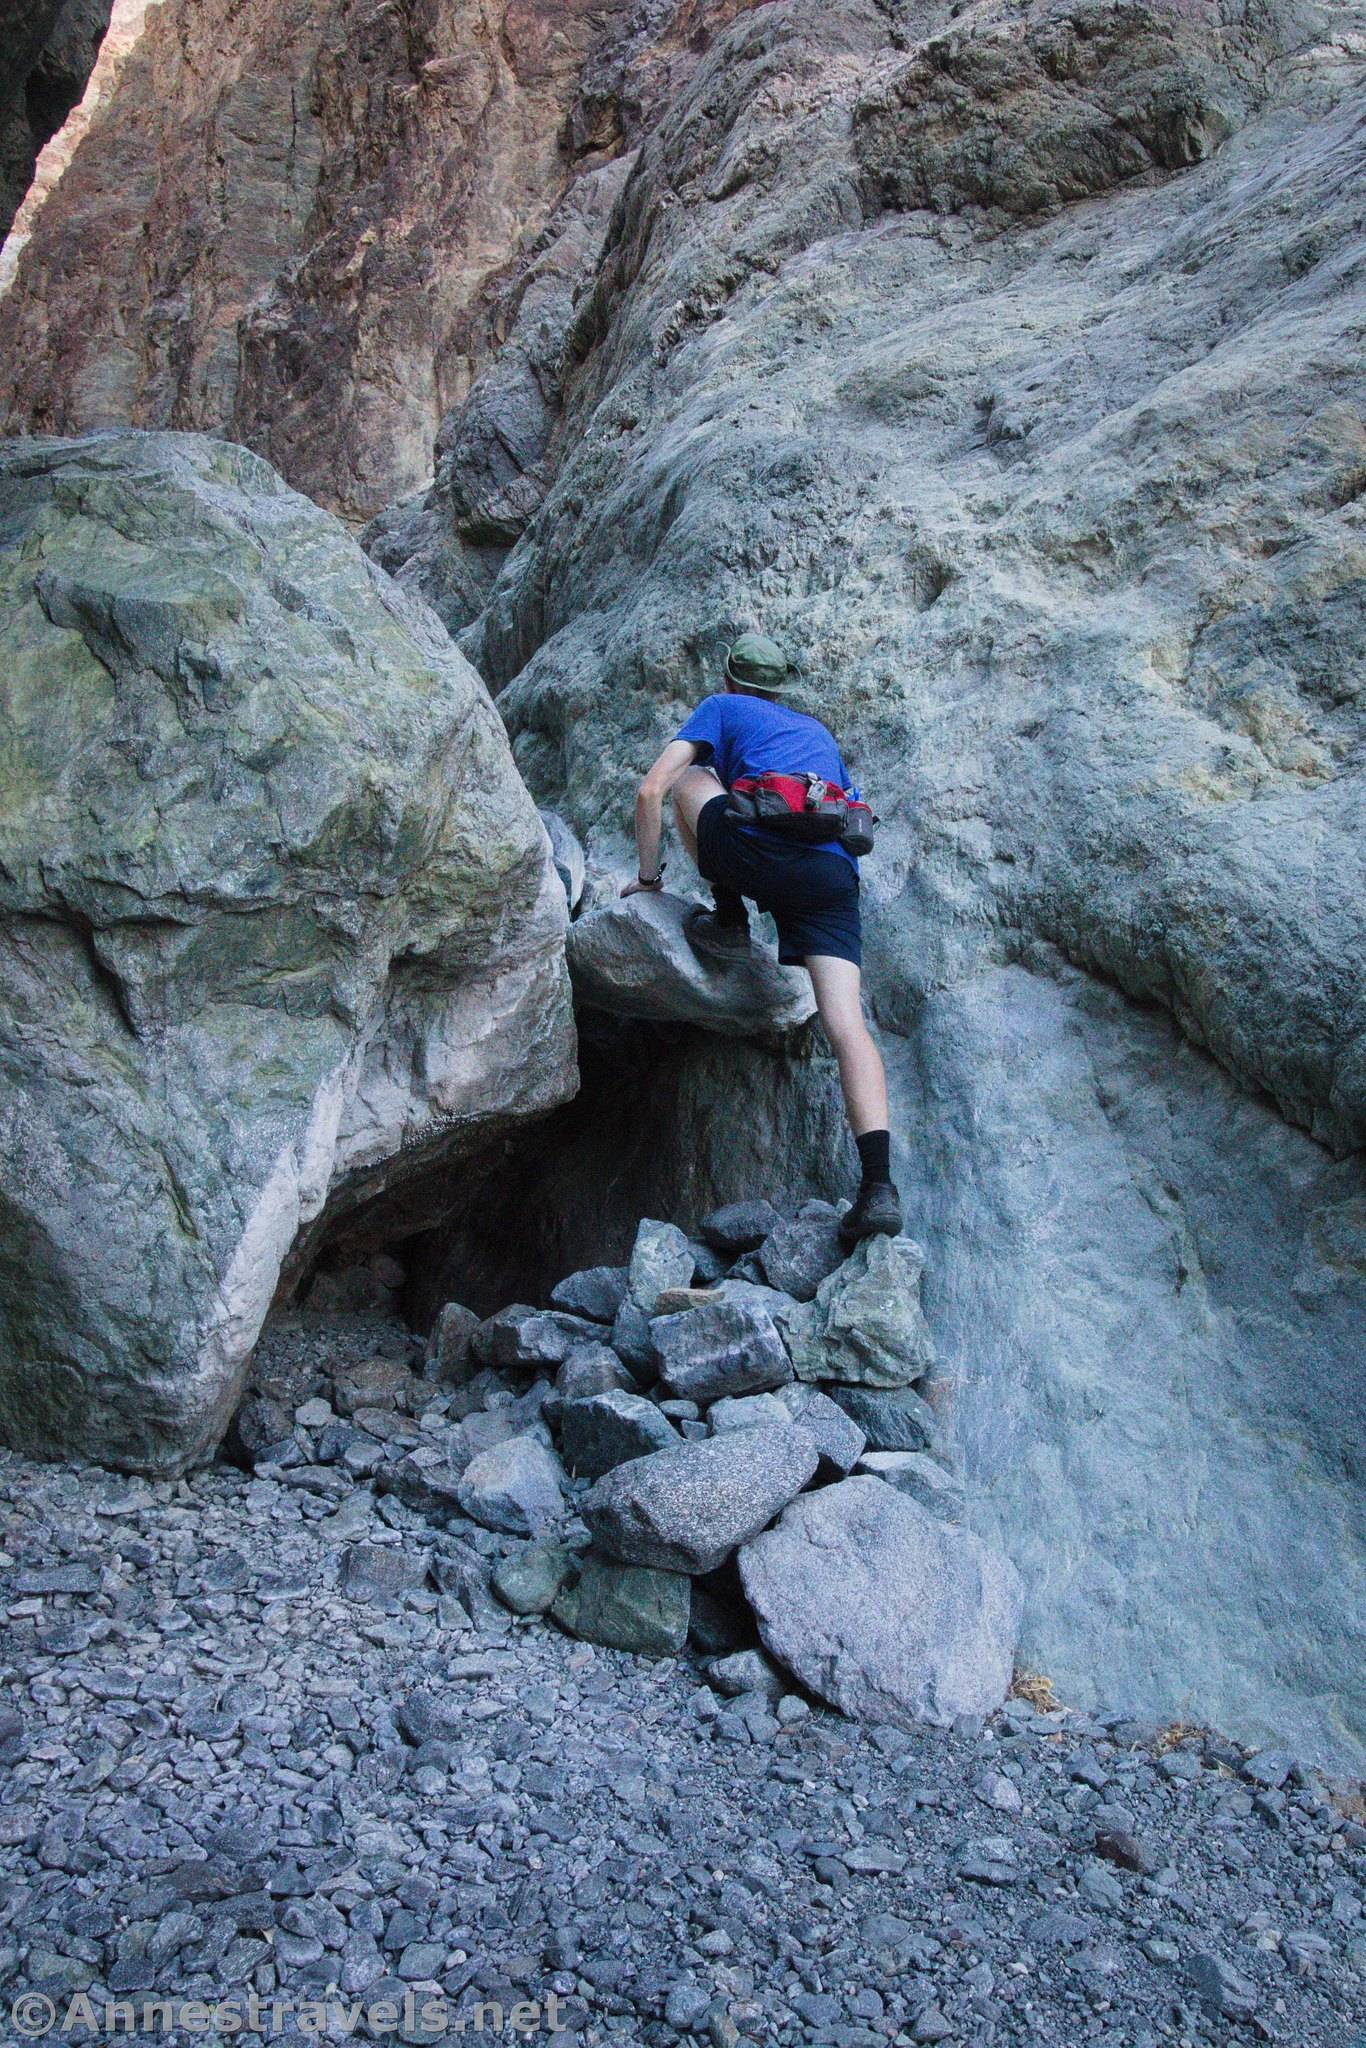 Scrambling up a dryfall in Willow Canyon, Death Valley National Park, California